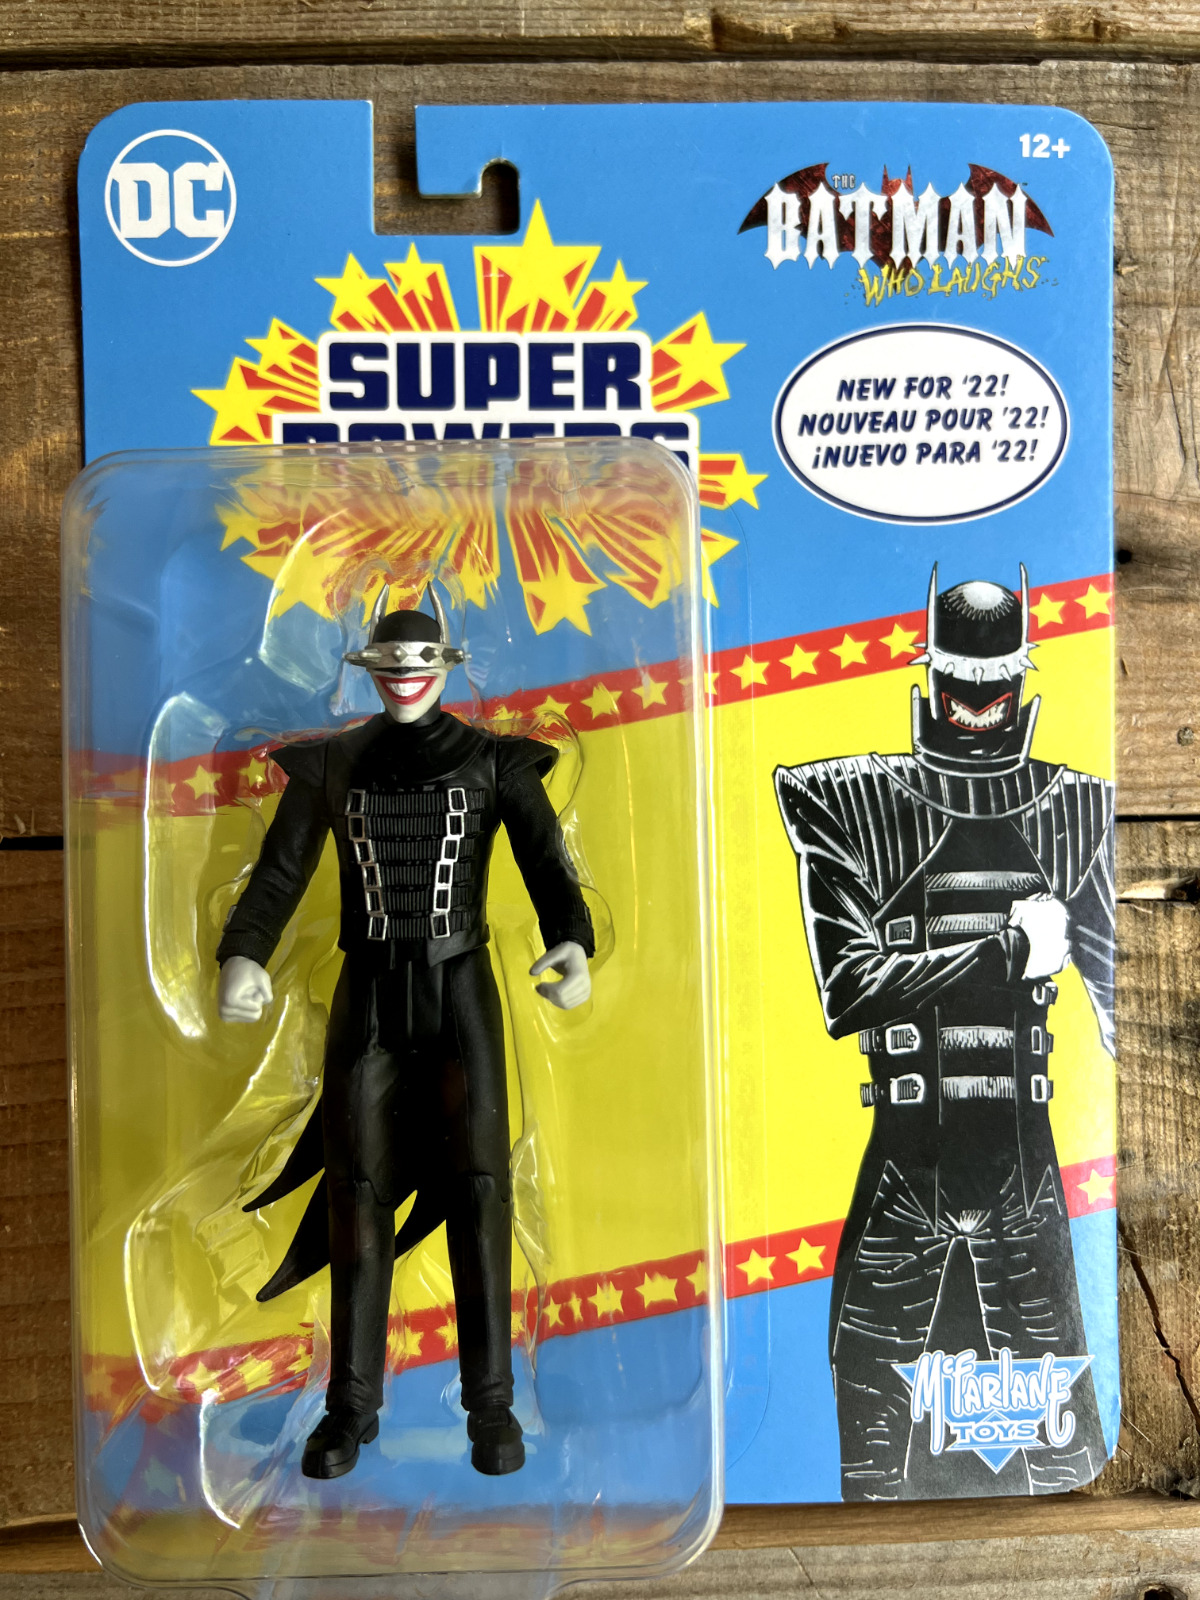 Awesome THE BATMAN WHO LAUGHS-DC Direct-McFarlane Toys-Super Powers #6-5″ Action Figure on eBay